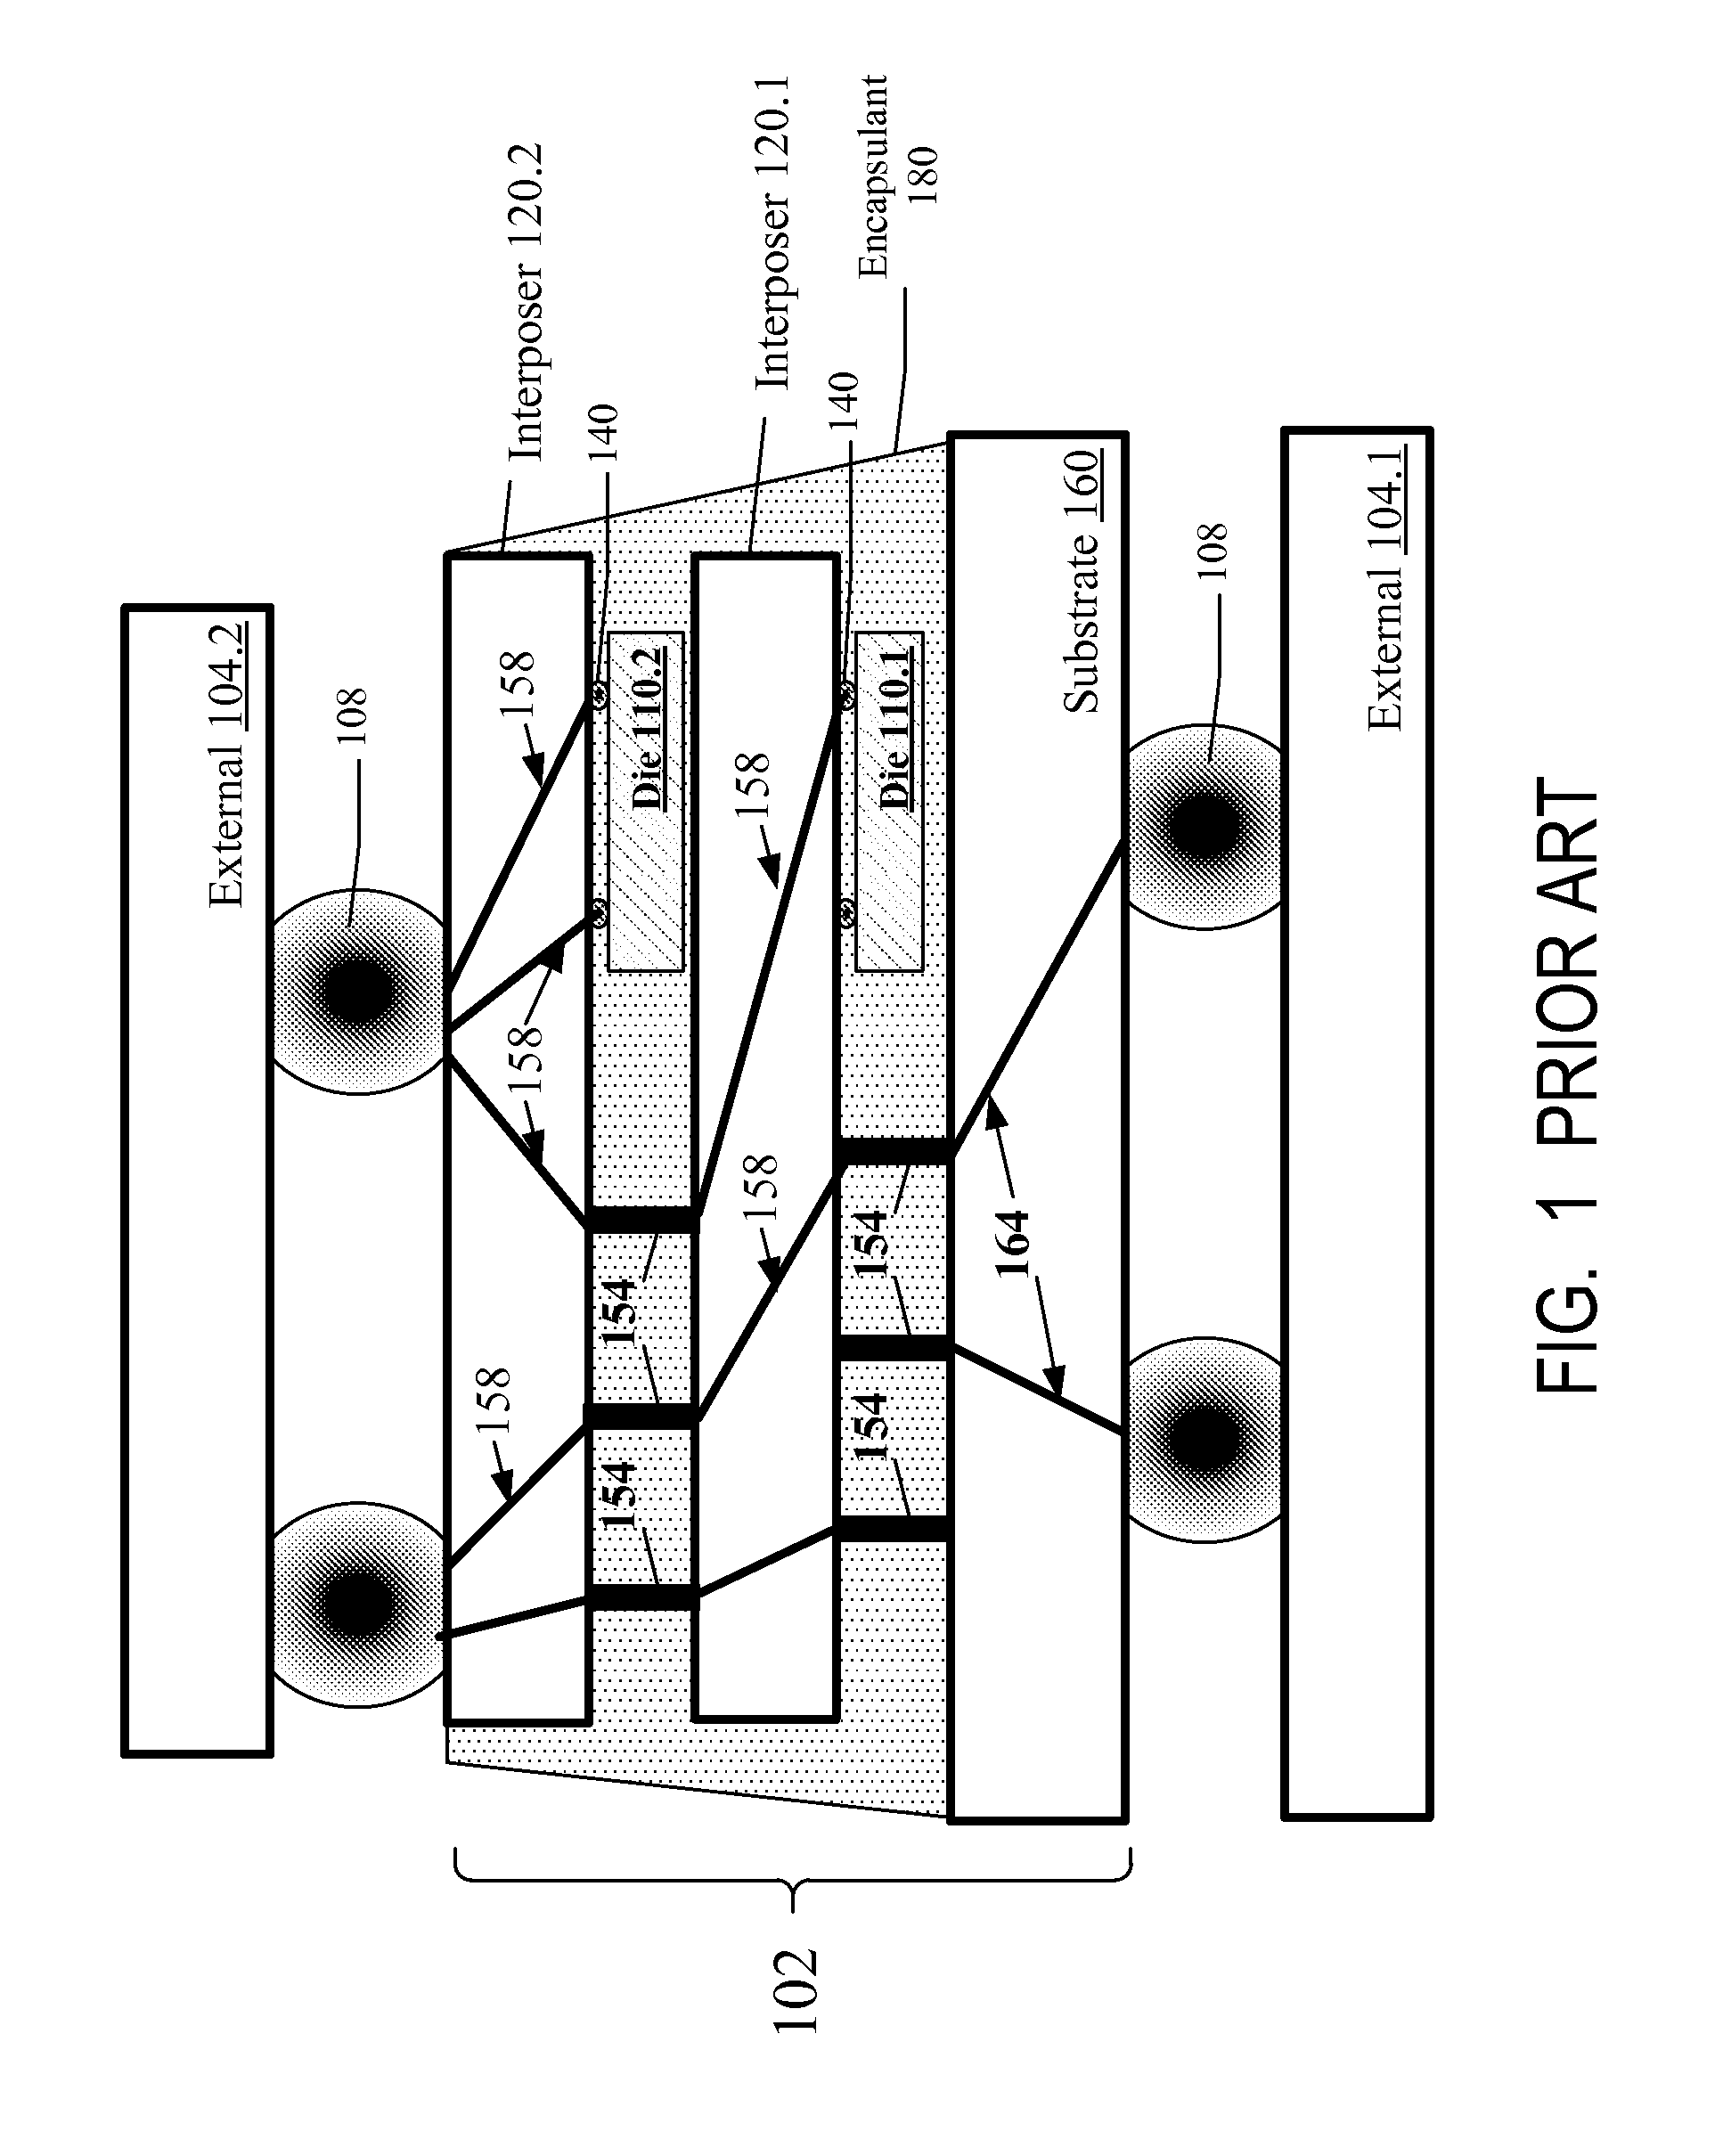 Microelectronic assemblies with integrated circuits and interposers with cavities, and methods of manufacture